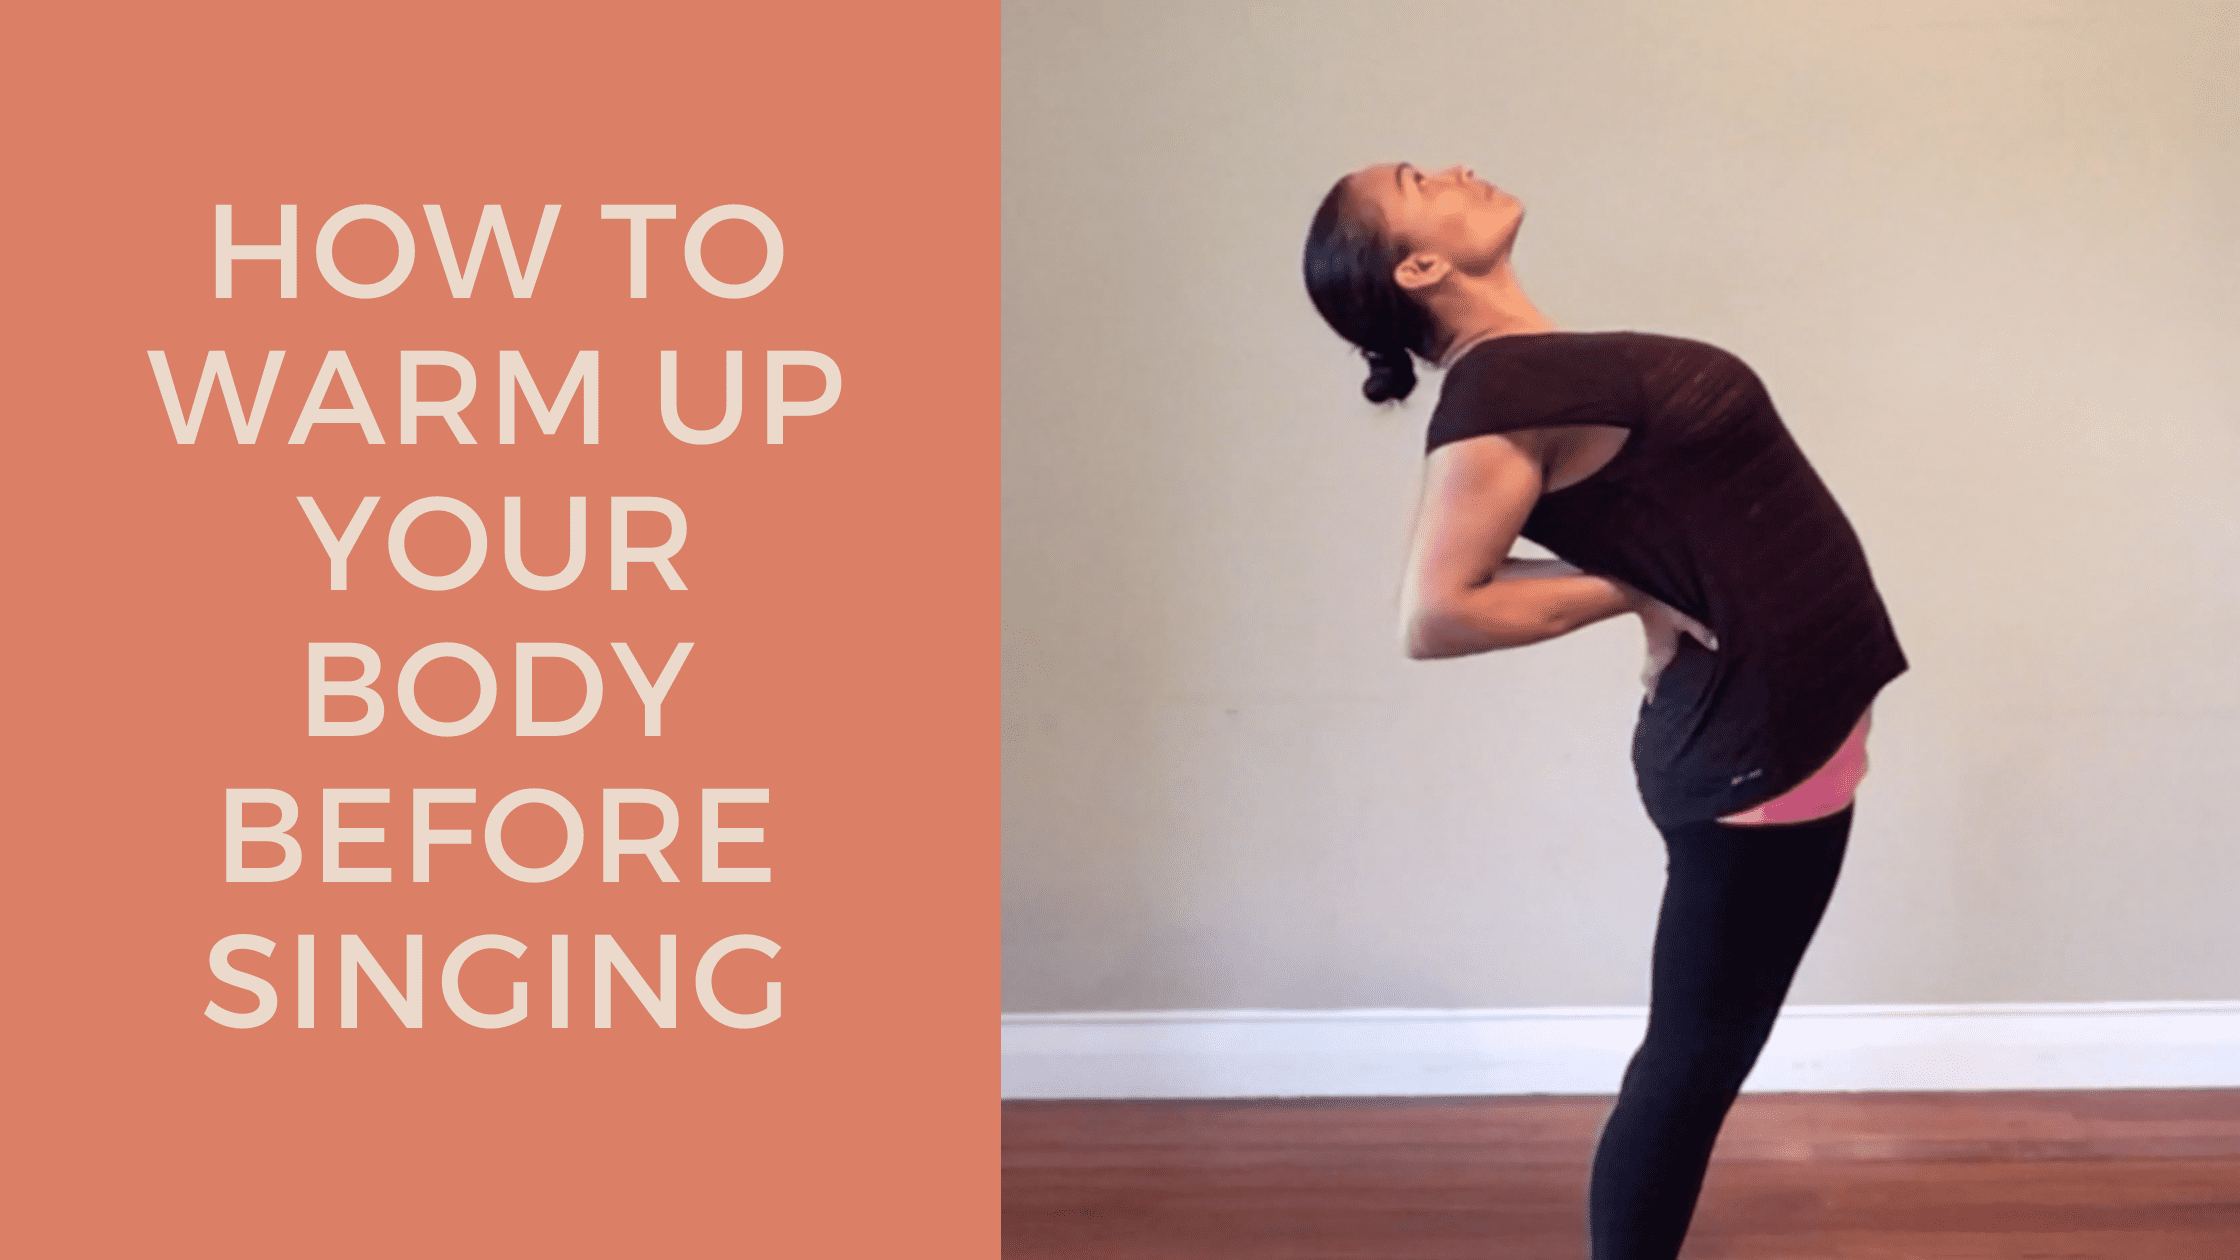 How To Warm Up Your Body Before Singing